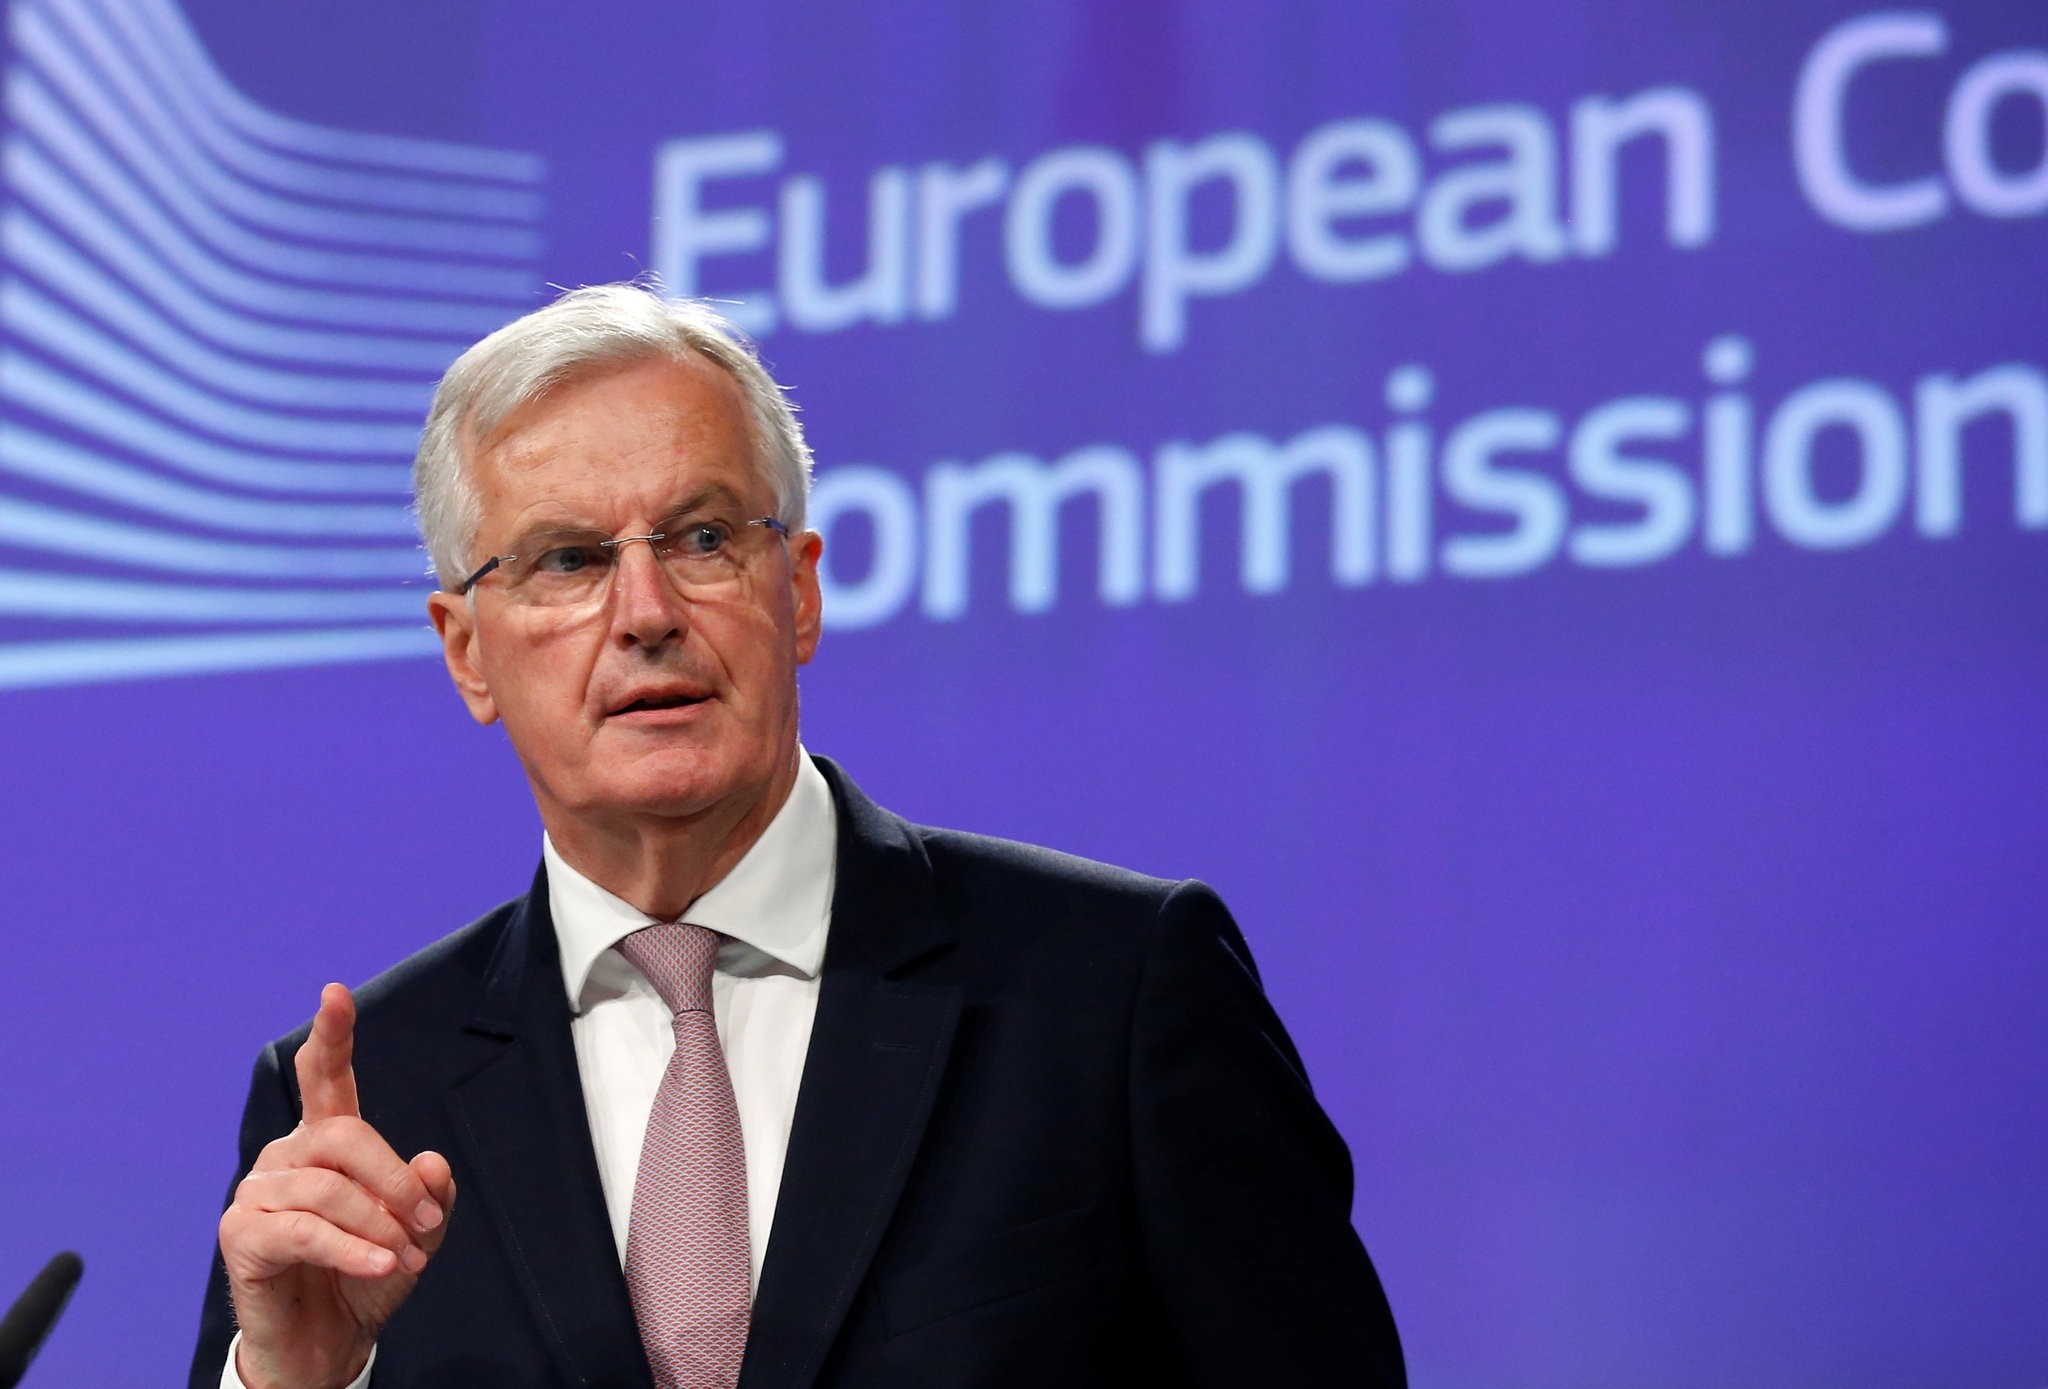 European Union's chief Brexit negotiator Michel Barnier addresses a news conference at the EU Commission headquarters in Brussels, Belgium, July 12, 2017. (REUTERS Photo)